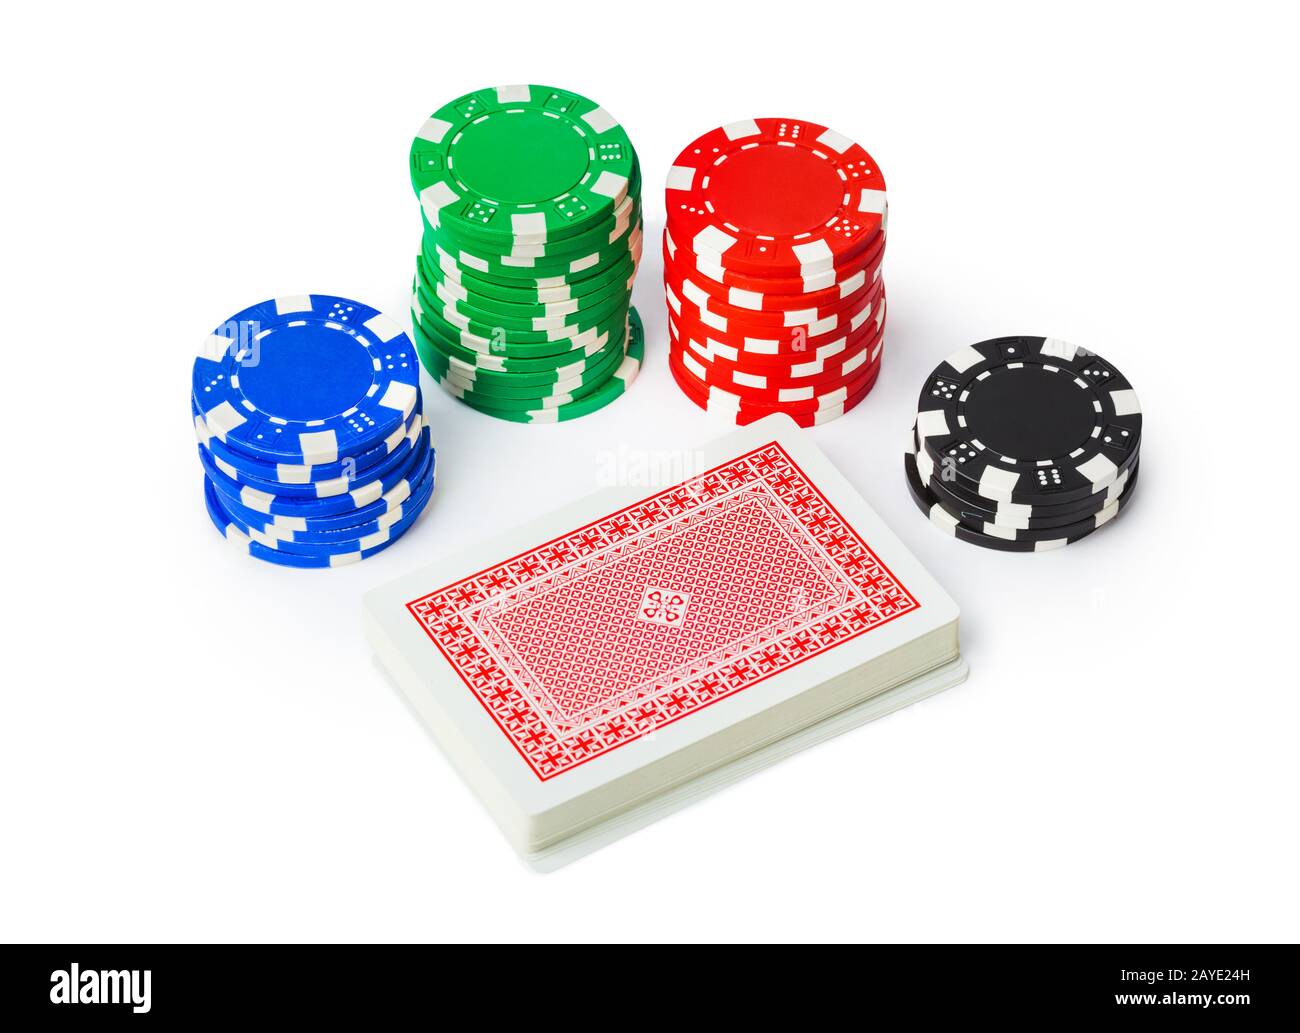 Gambling casino chips and playing cards Stock Photo